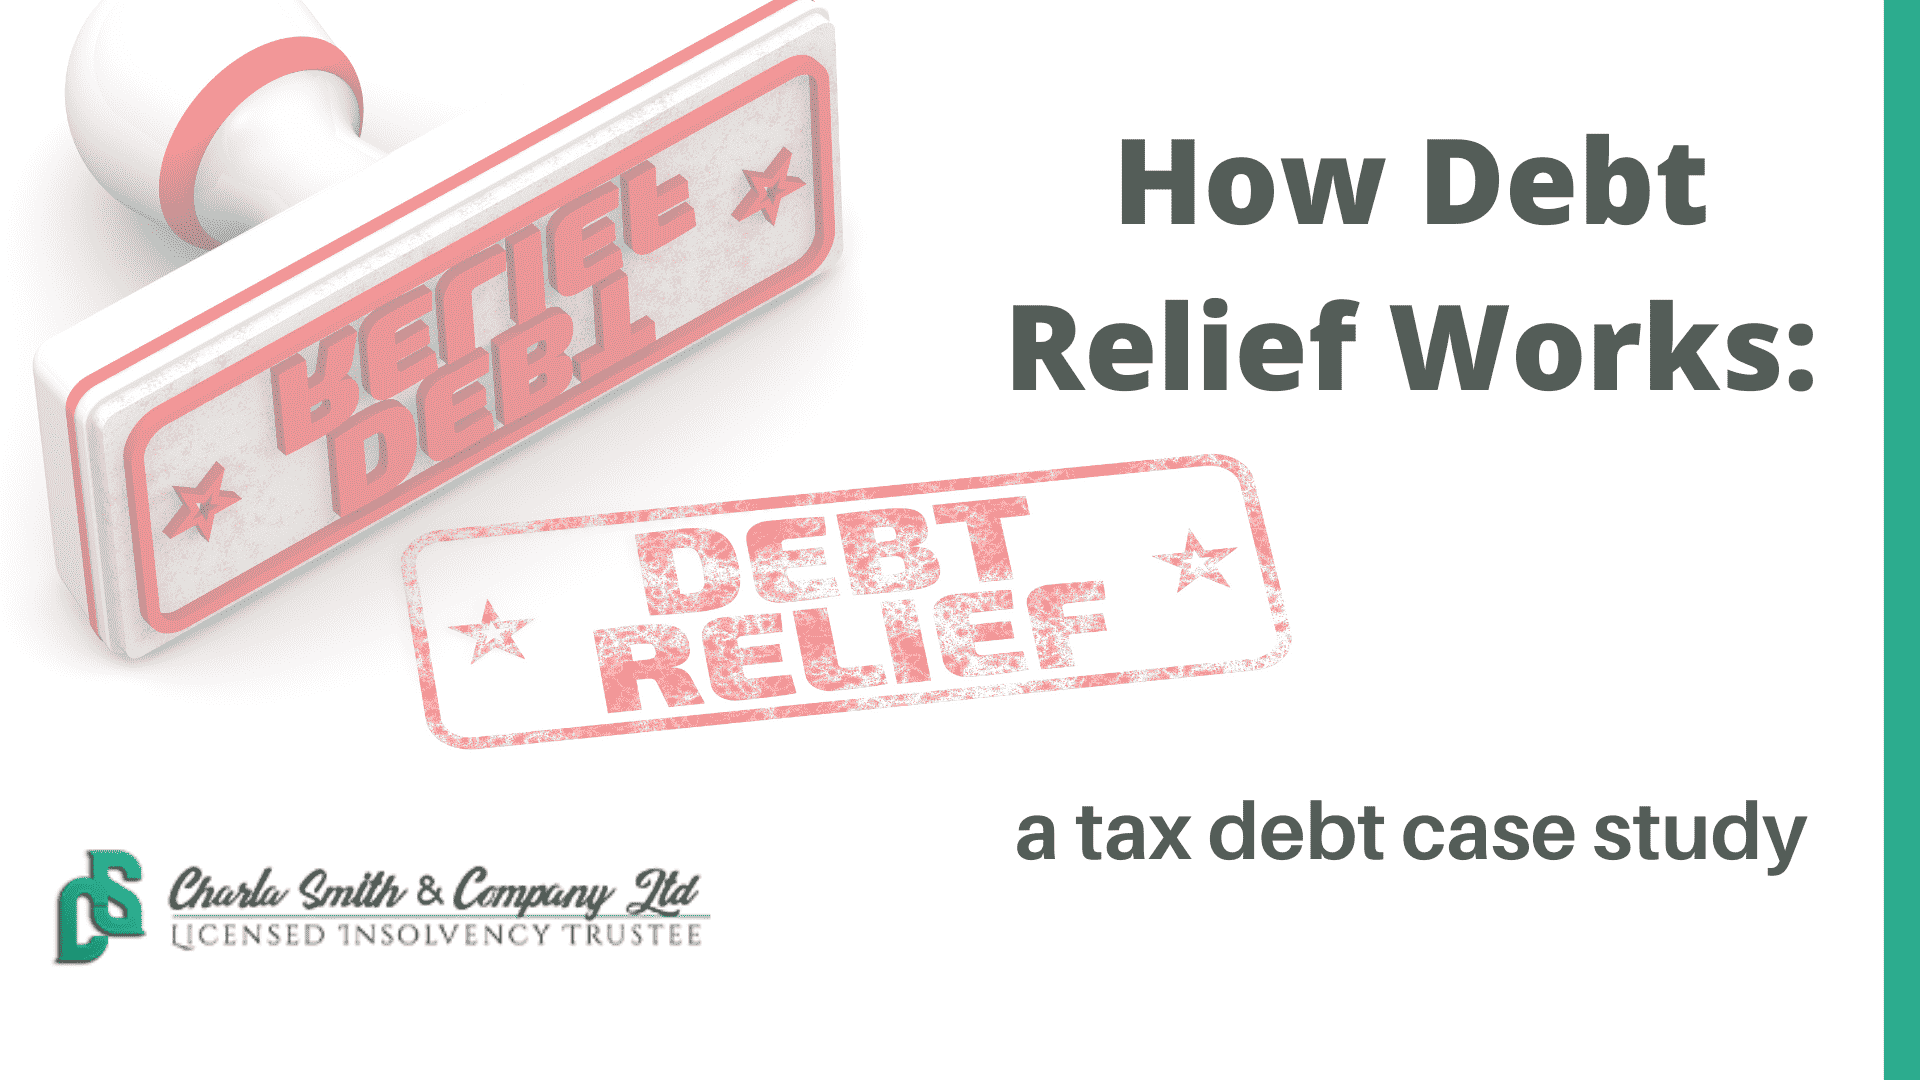 How debt relief works: A tax debt case study